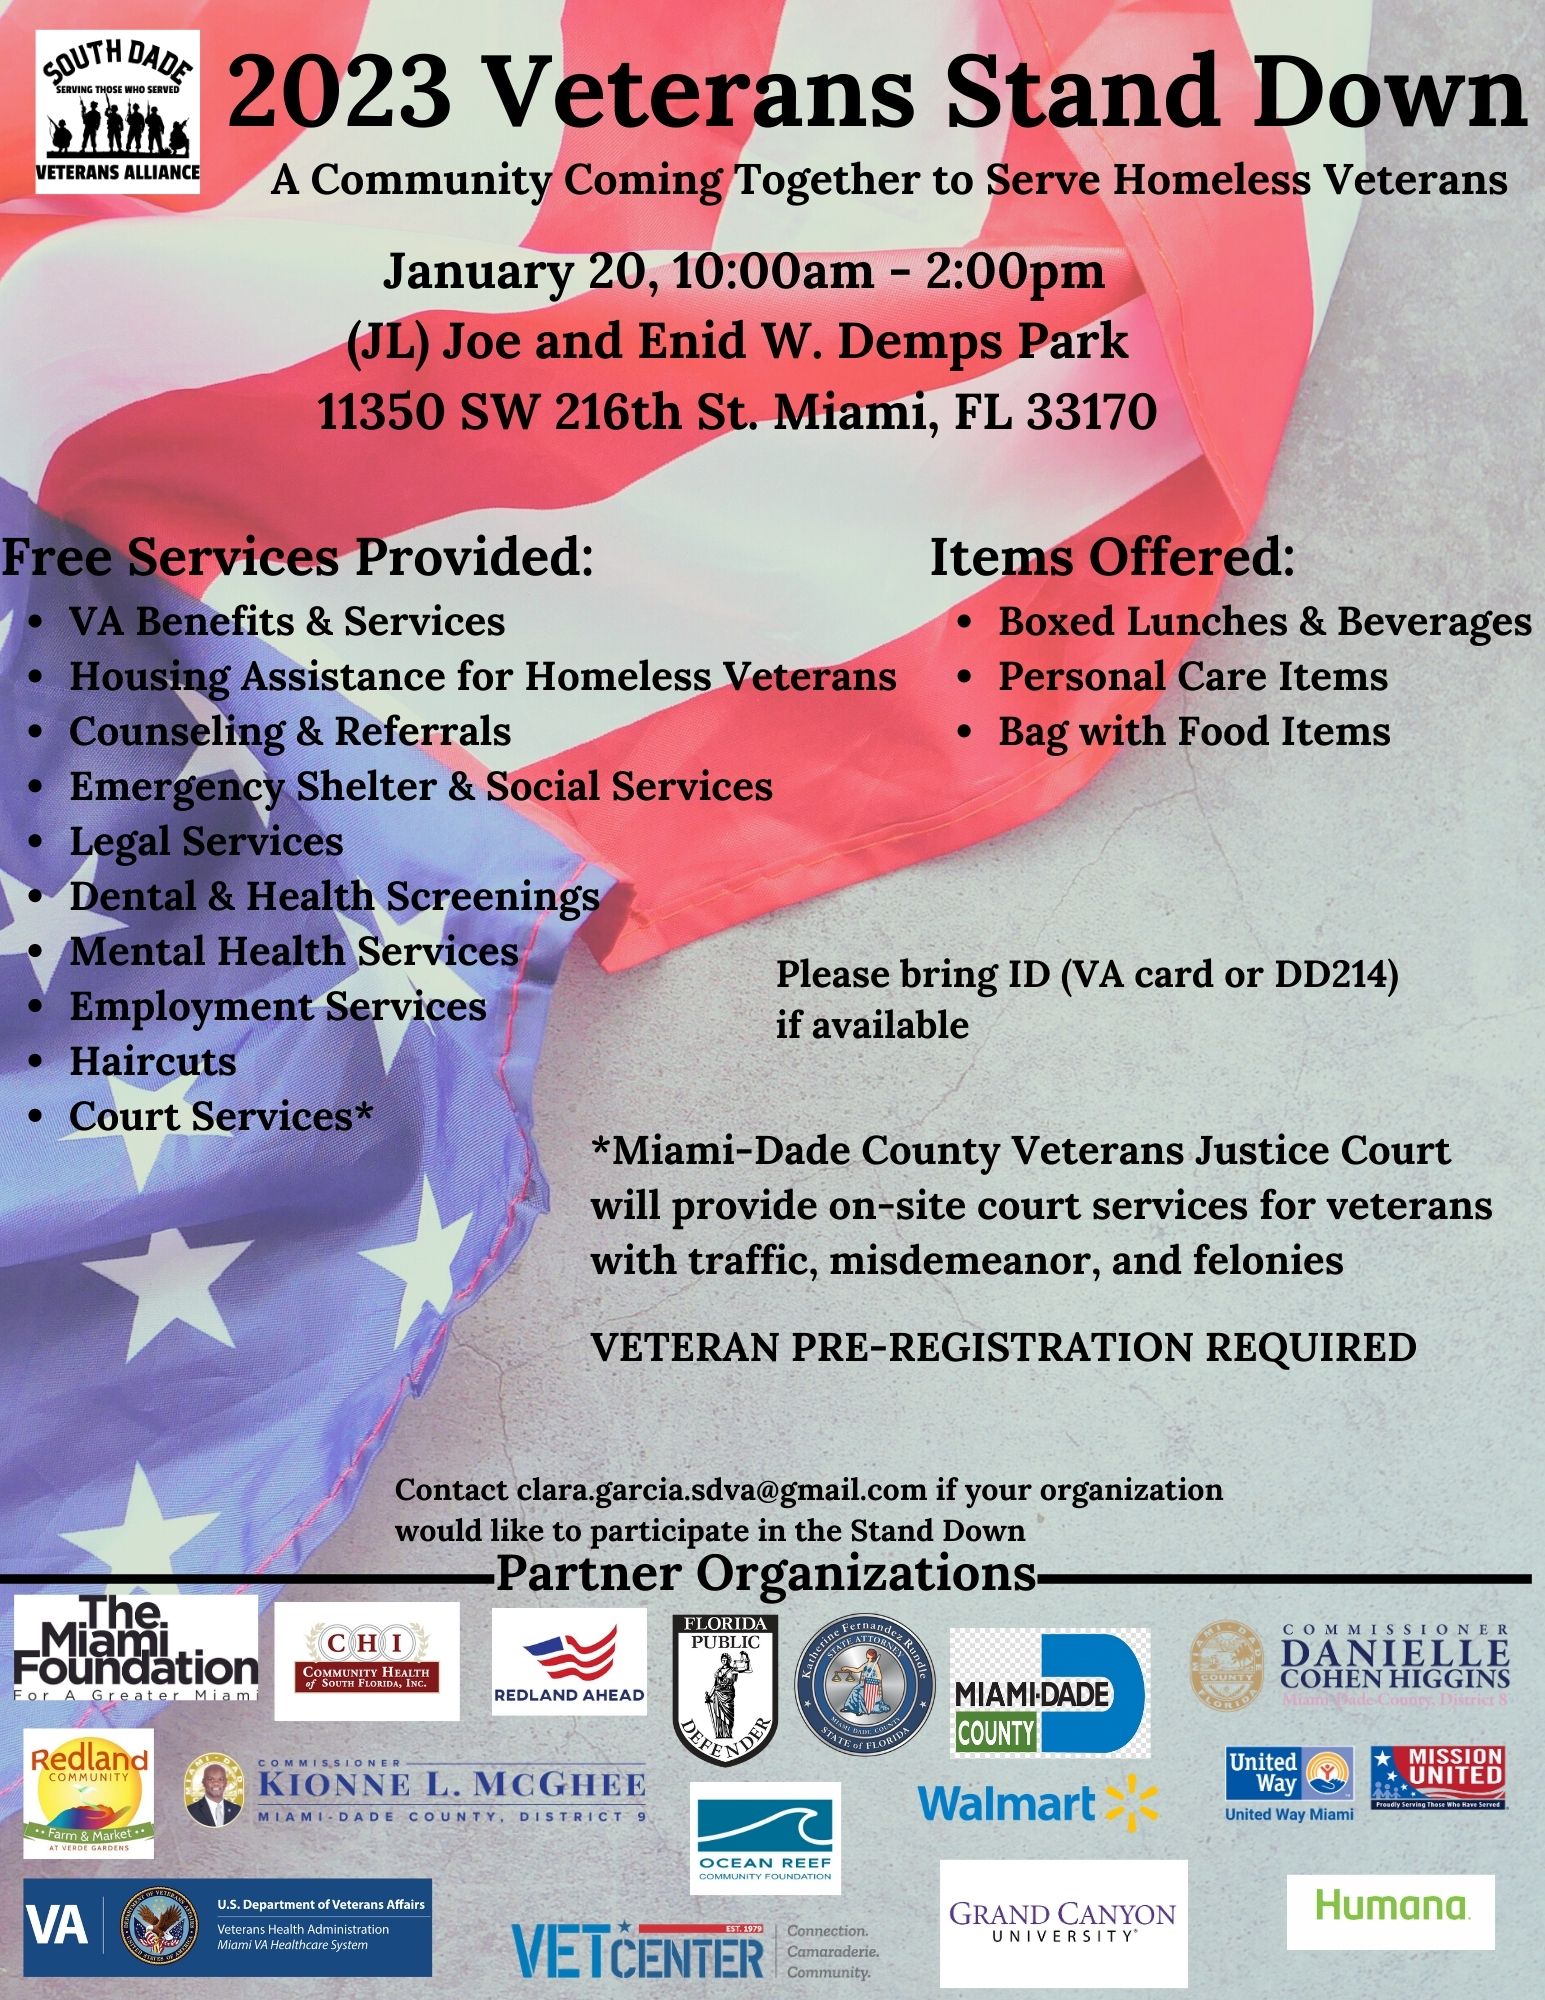 South Dade Veterans Stand Down Flyer 2023-01-20